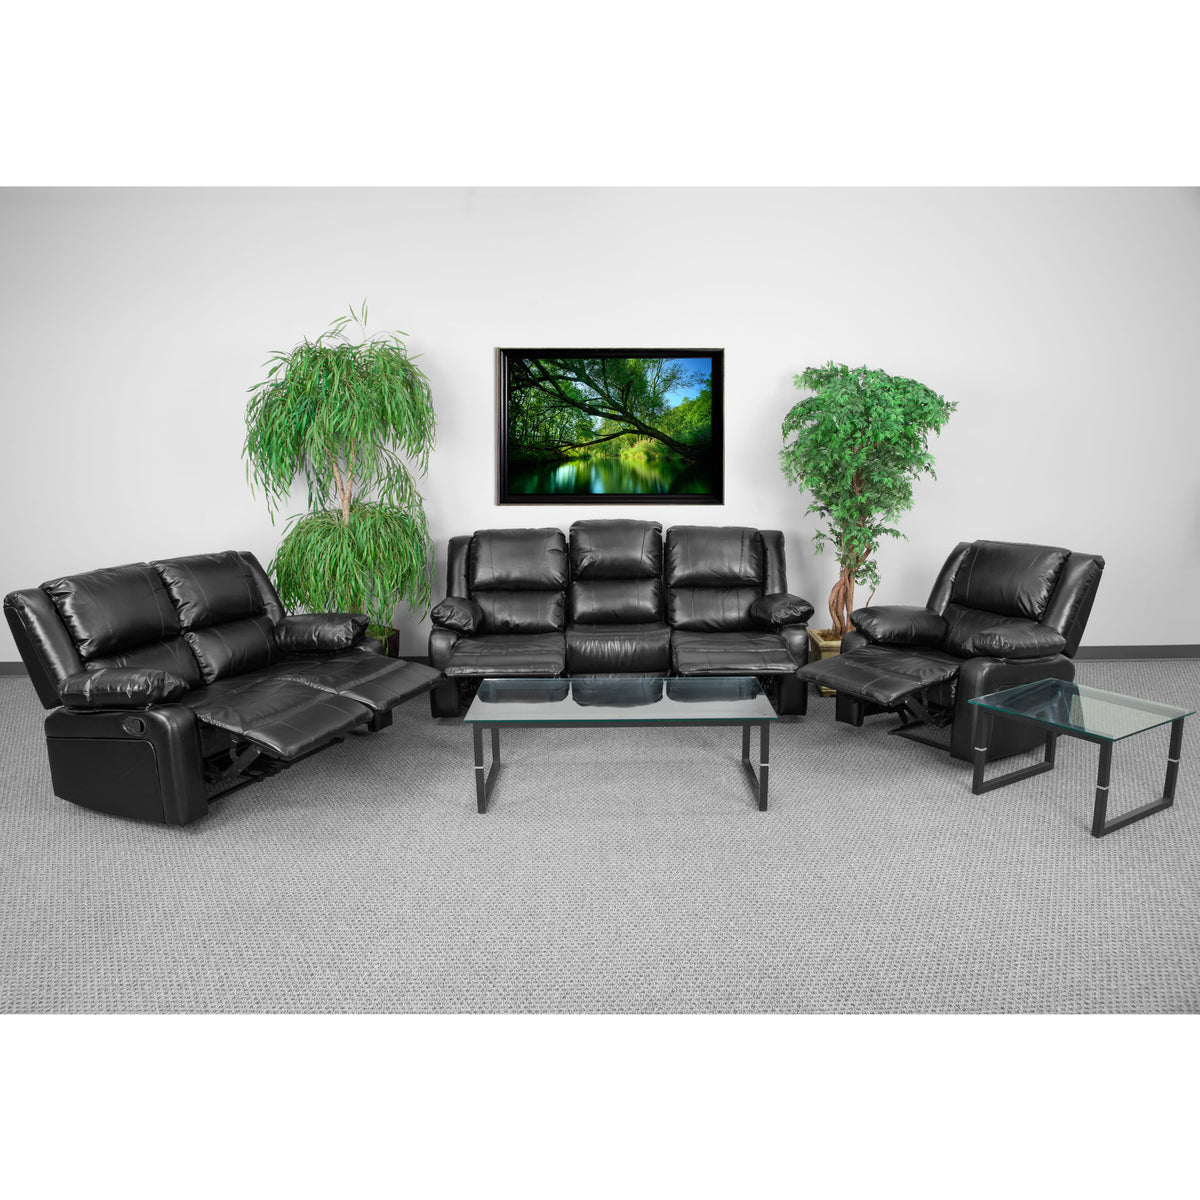 Black LeatherSoft |#| Contemporary Black LeatherSoft Reclining Plush Pillow Back Sofa Set-Padded Arms